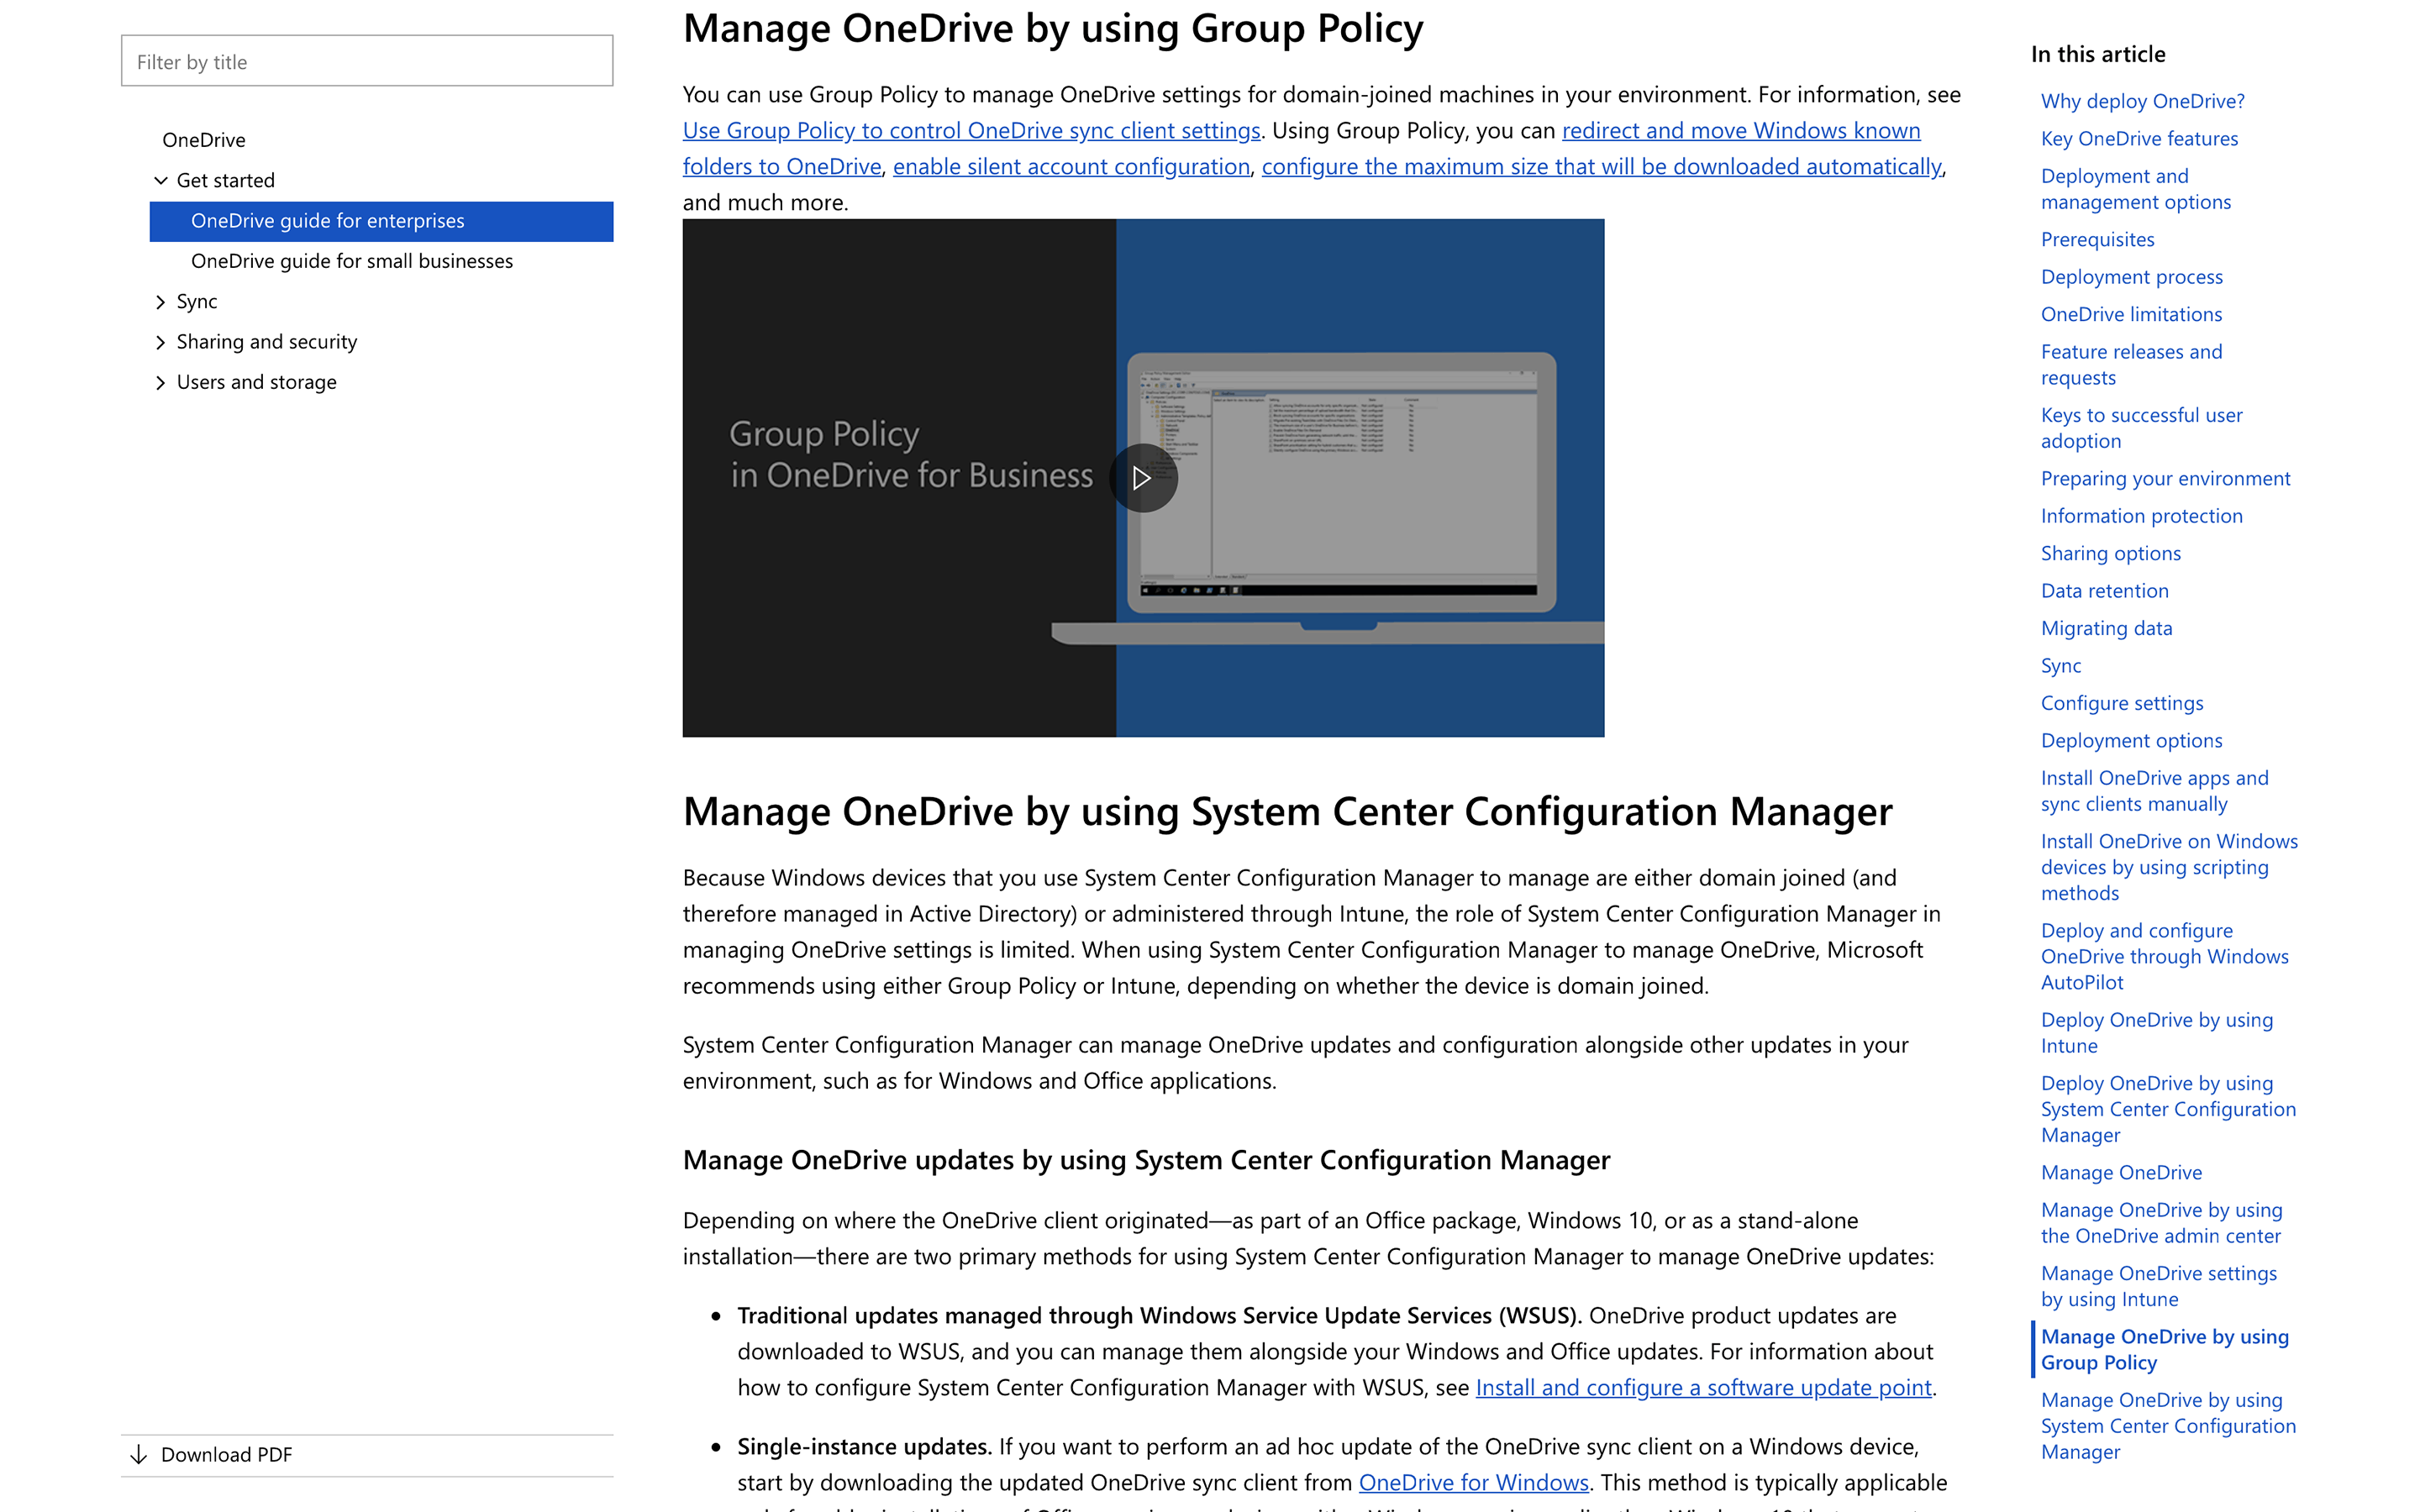 Screenshot of the “Manage OneDrive by using Group Policy” section